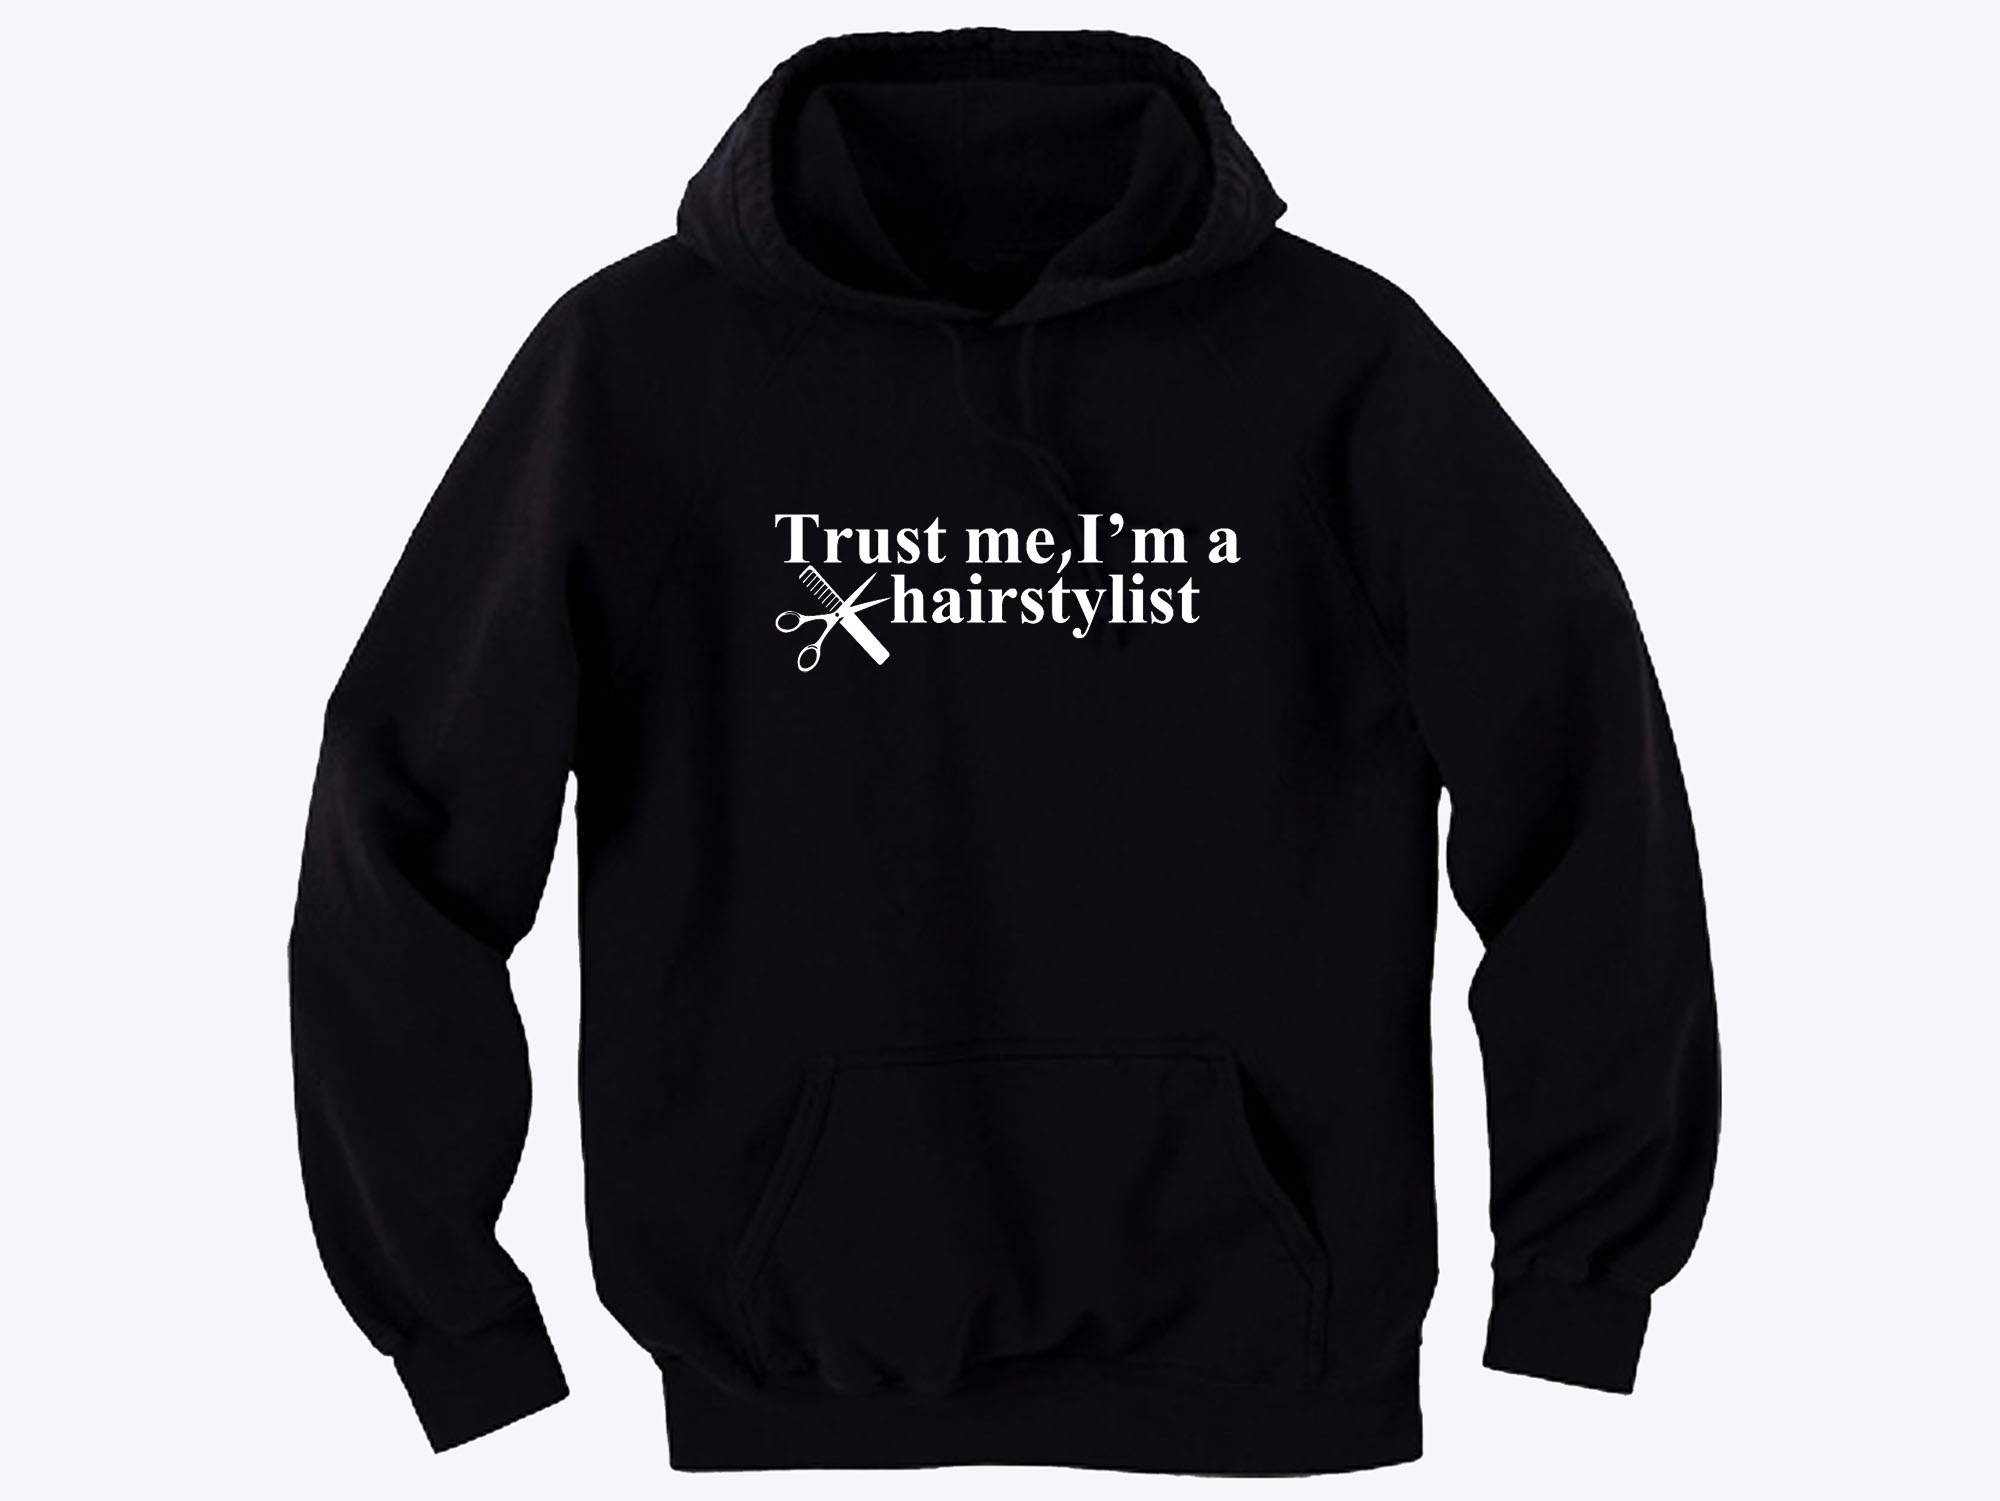 Trust me I'm a hairstylist cool graphic hoodie